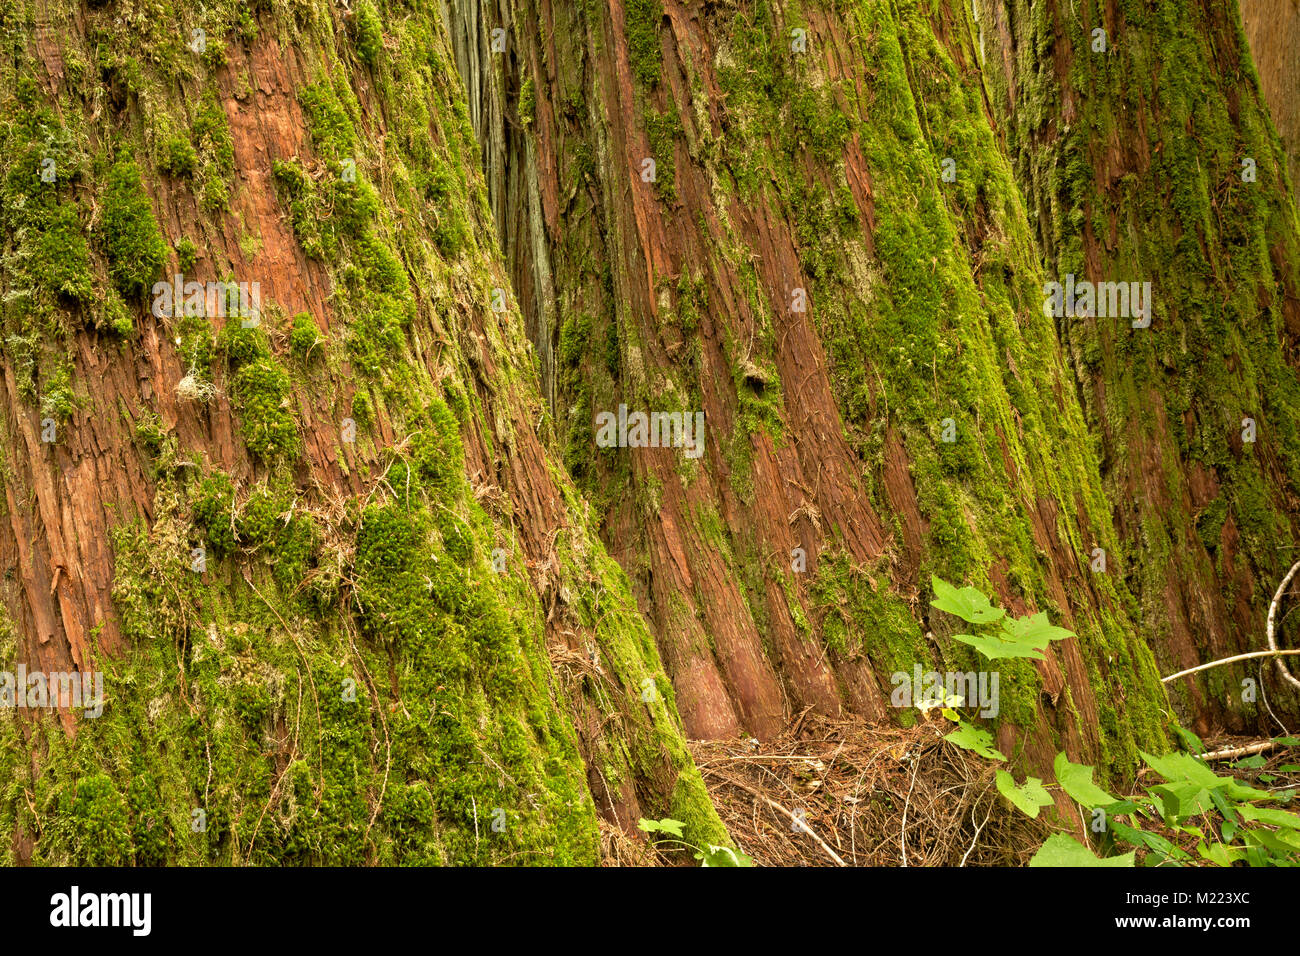 WA13218-00...WASHINGTON - Three huge Western Red Cedar trees growing together along the Big Beaver Trail section of the Pacific Northwest Trail in Ros Stock Photo